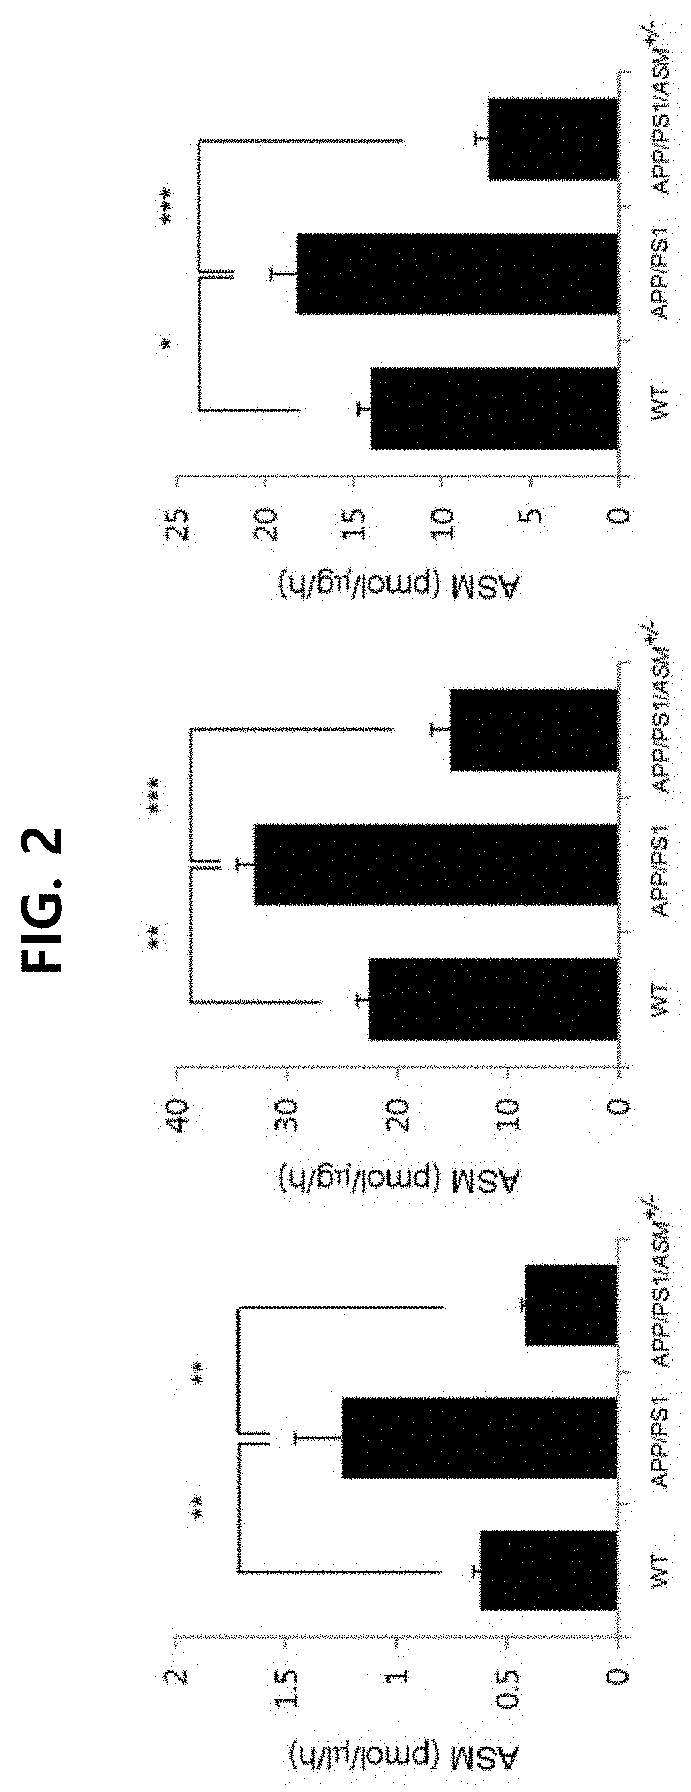 Method for treating a neurological disorder comprising administering ASM inhibitors